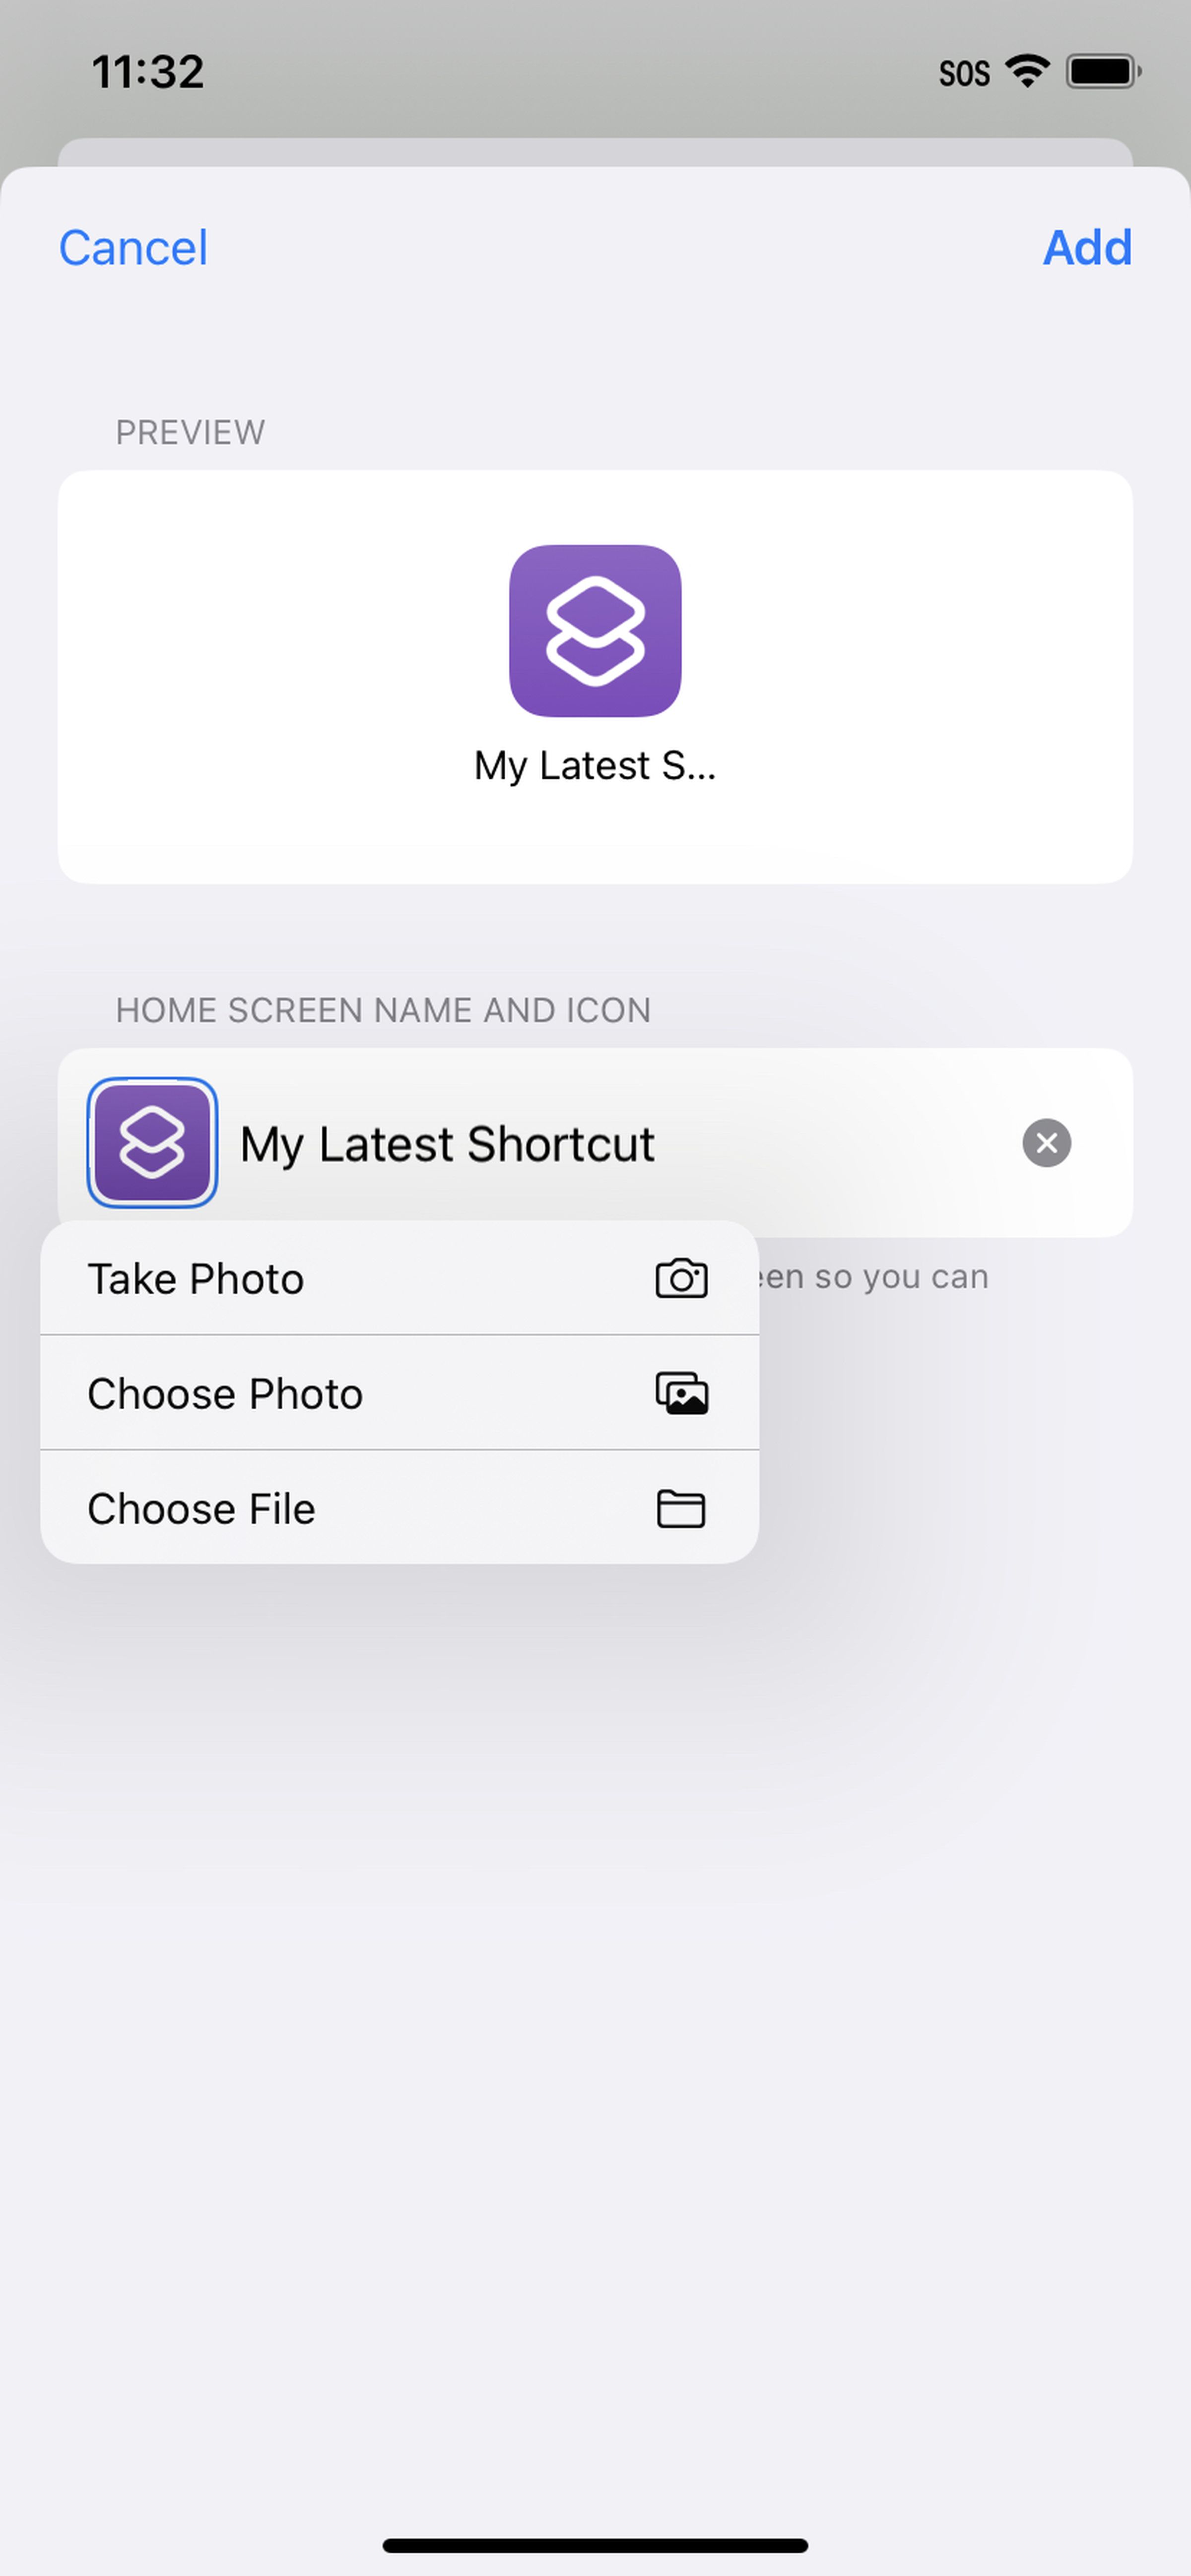 Drop down menu from shortcut icon on creation page.